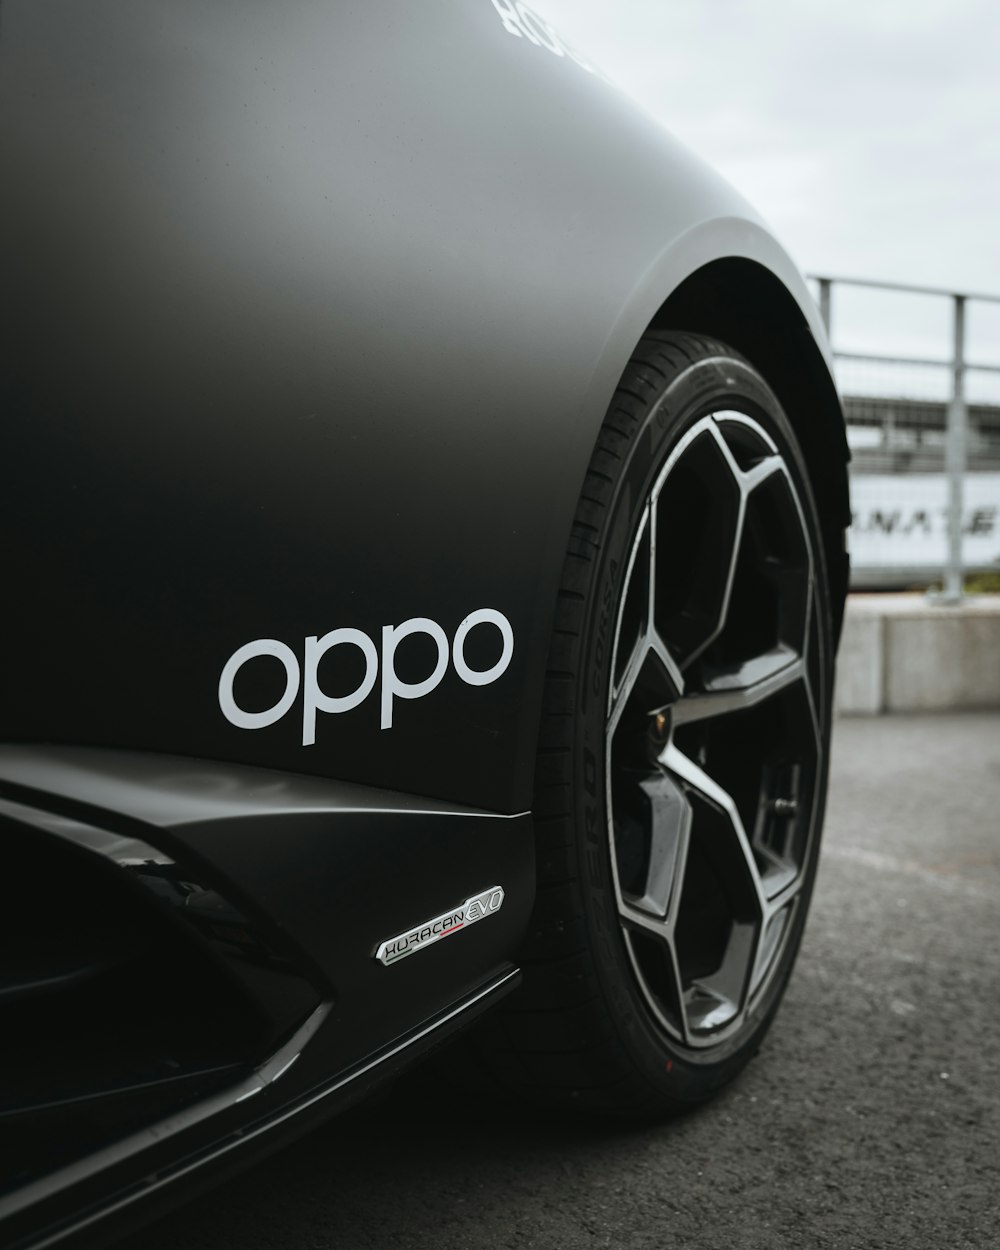 a close up of a car with the word oppo on it